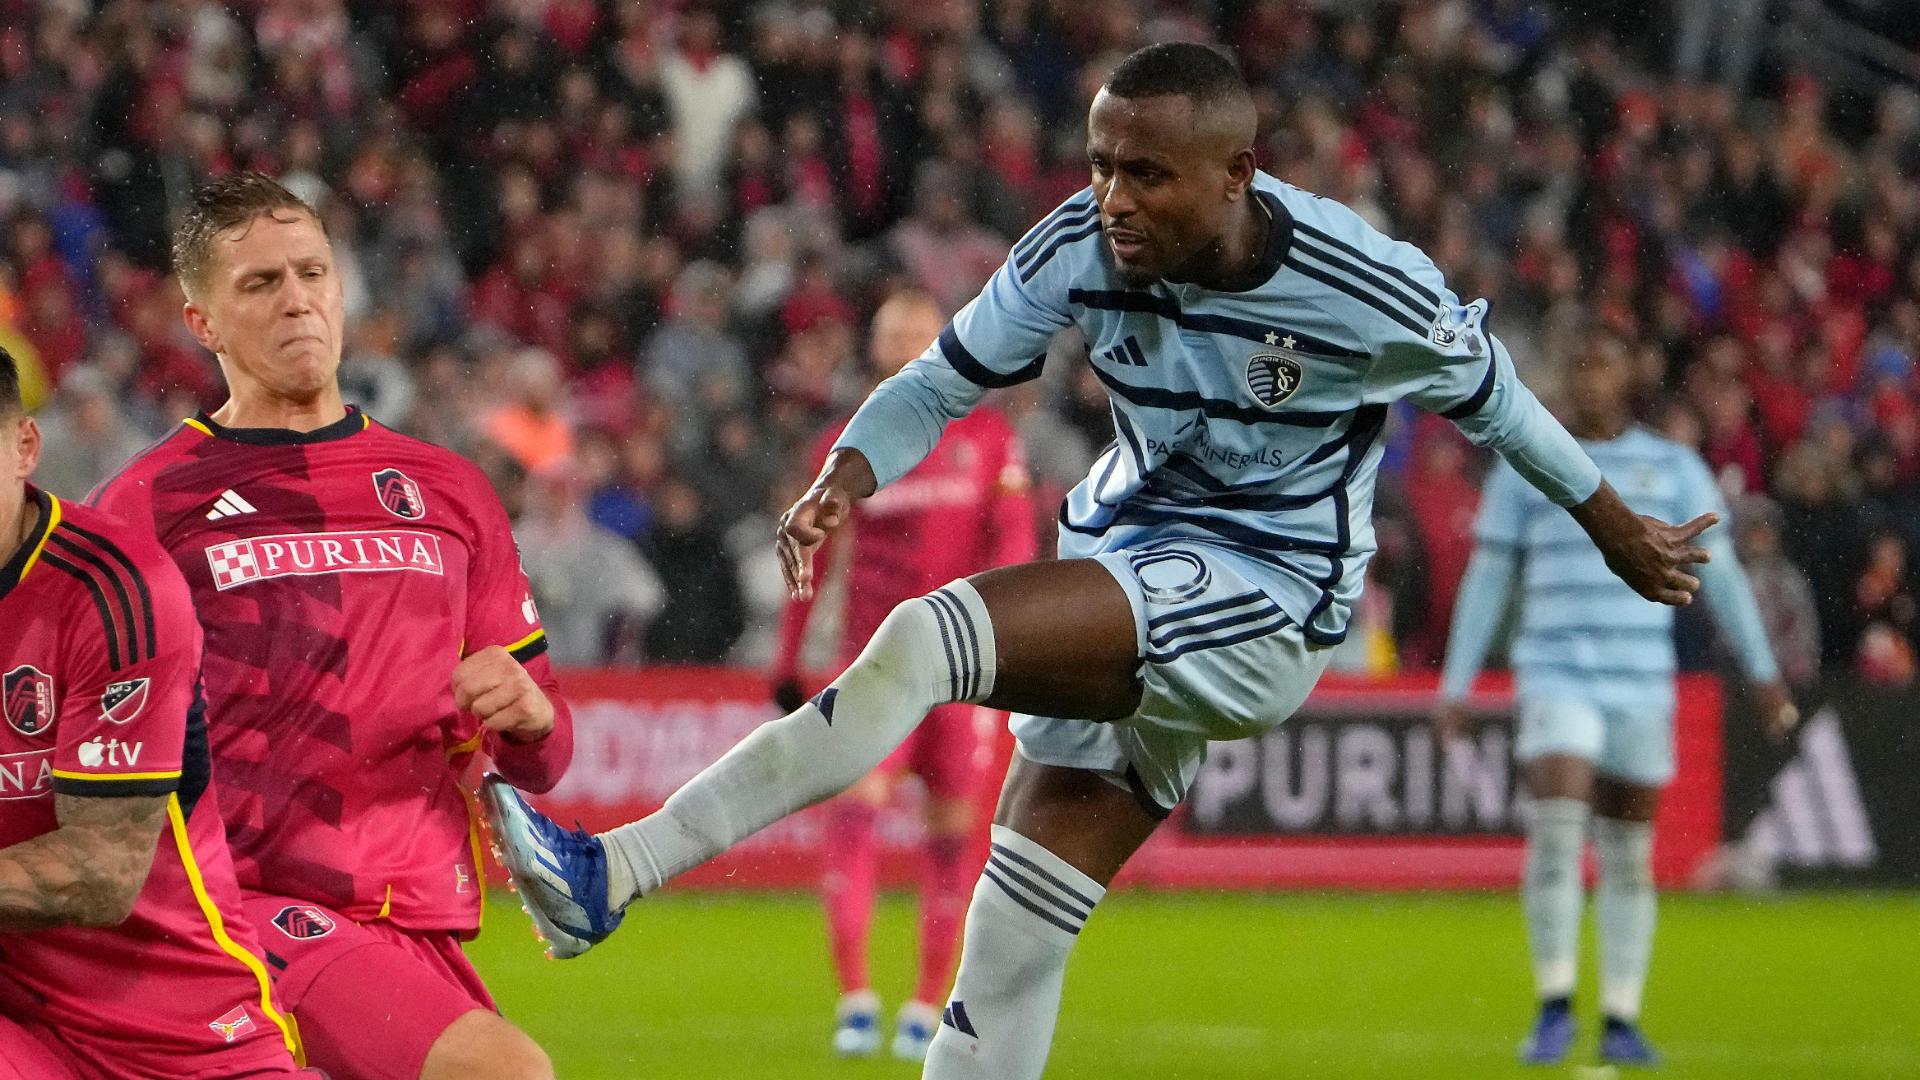 Match Preview: Sporting KC hosts St. Louis CITY SC on Saturday in the  Soccer Capital of America